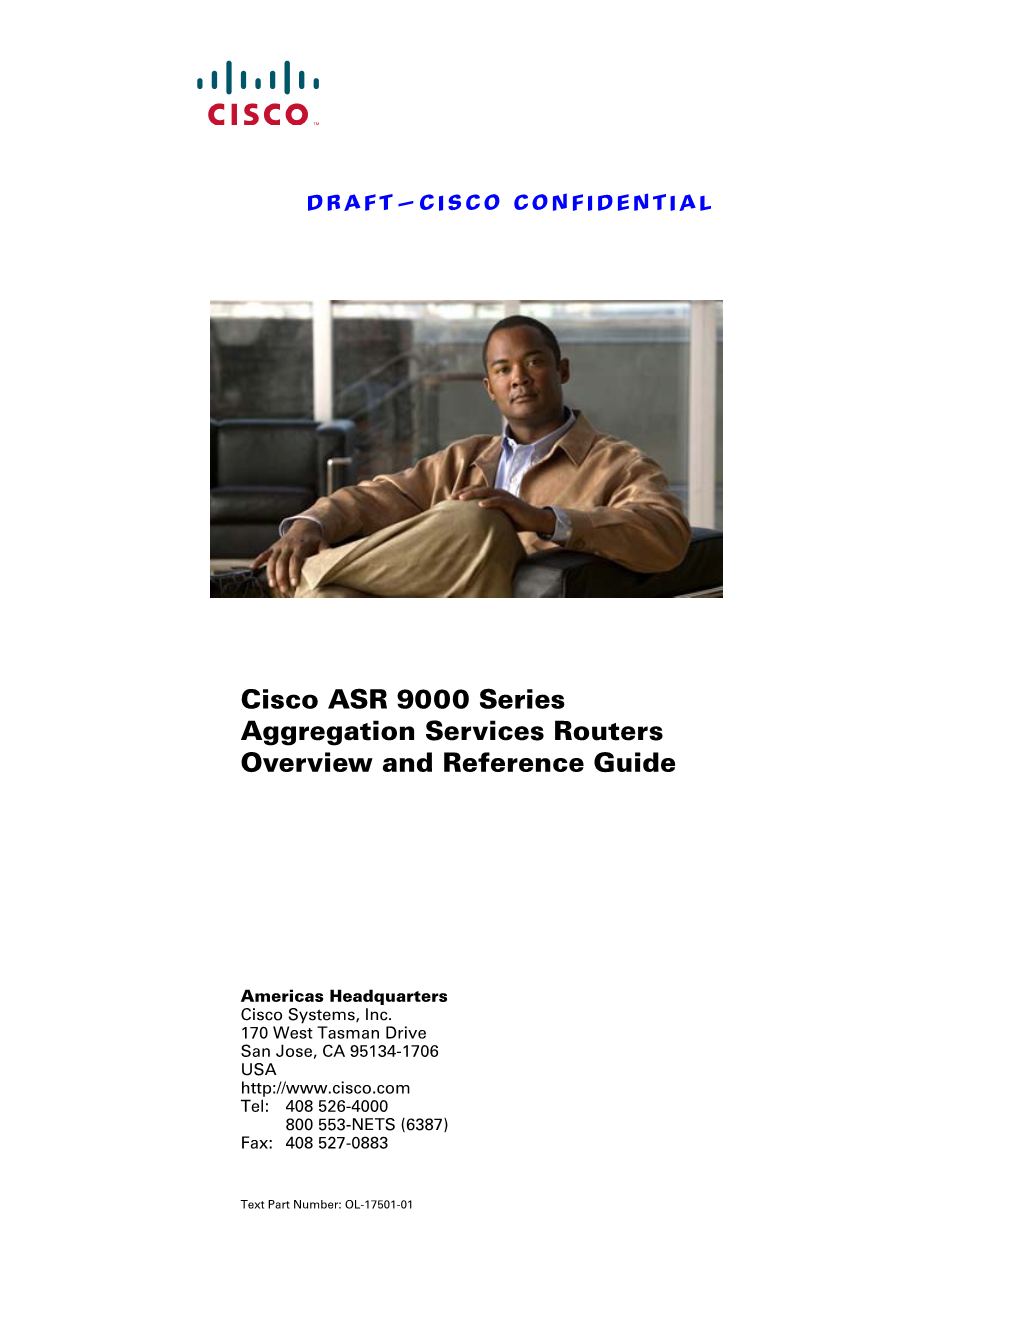 Cisco ASR 9000 Series Aggregation Services Router Overview and Reference Guide © 2009 Cisco Systems, Inc